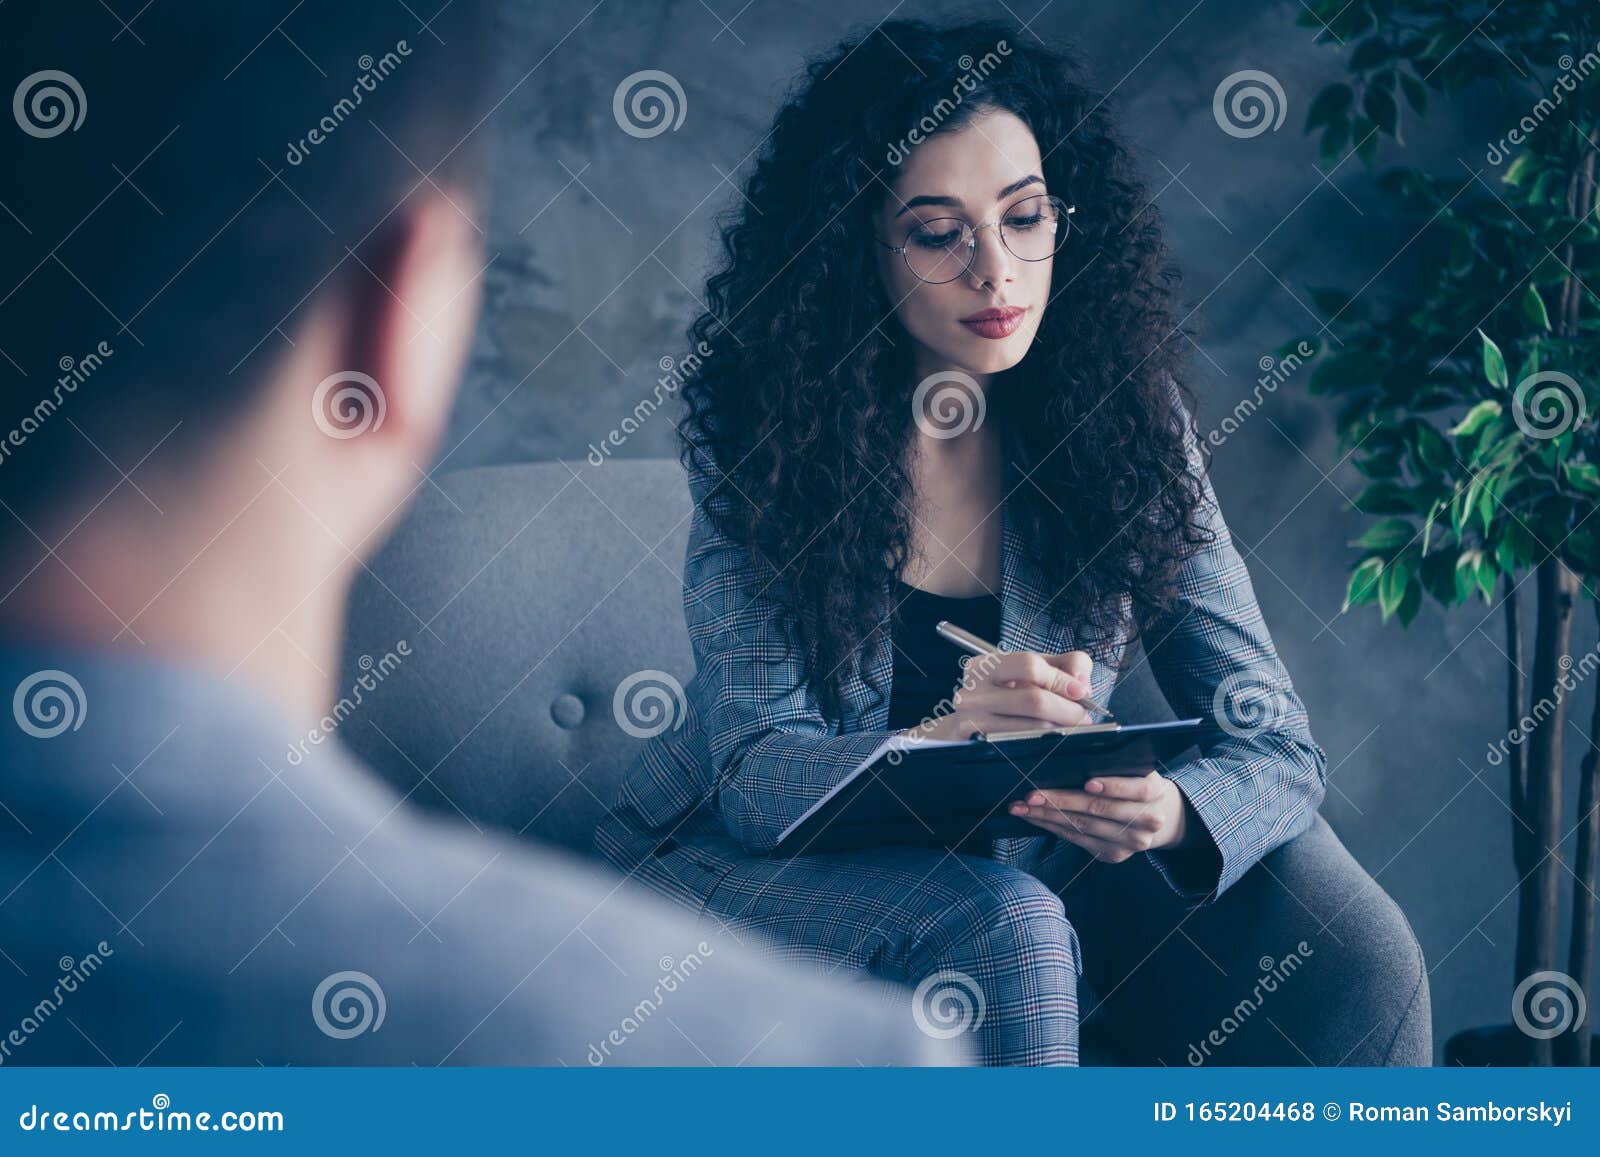 Portrait Of Her She Nice Attractive Skilled Experienced Wavy Haired Girl Psychologist Sitting In